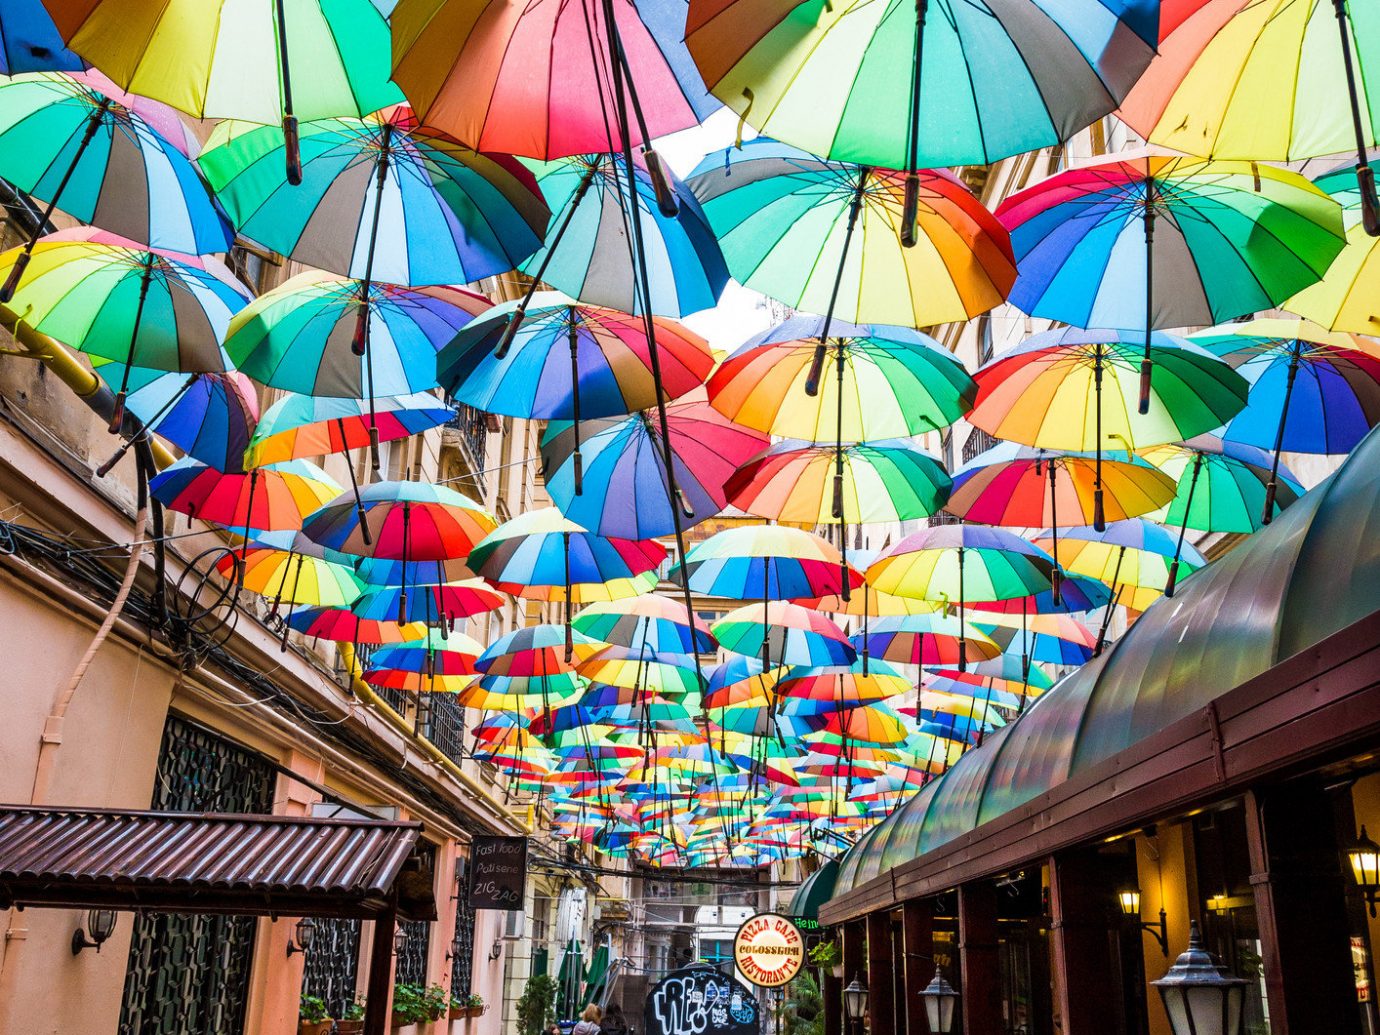 Travel Tips Trip Ideas umbrella accessory color rain outdoor colorful window art glass colored symmetry lined